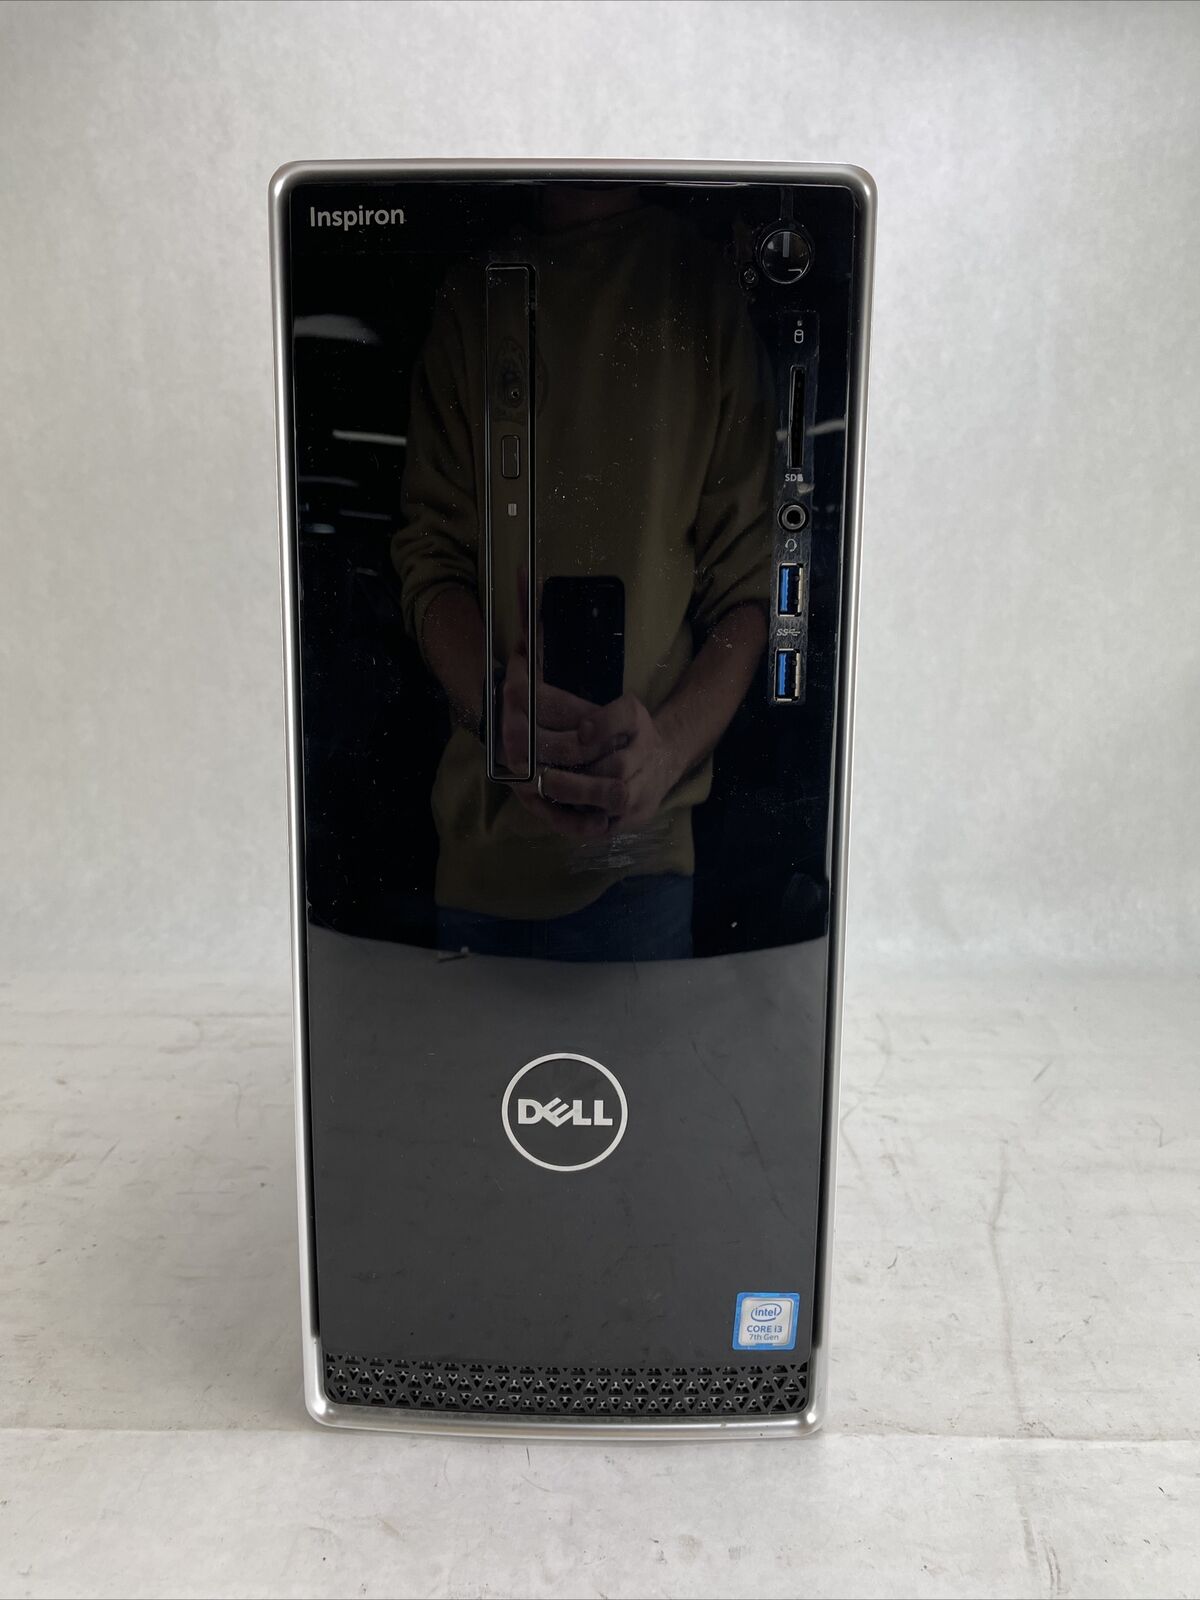 Dell Inspiron 3668 DT Intel Core i3-7100 3.9GHz 8GB RAM No HDD No OS